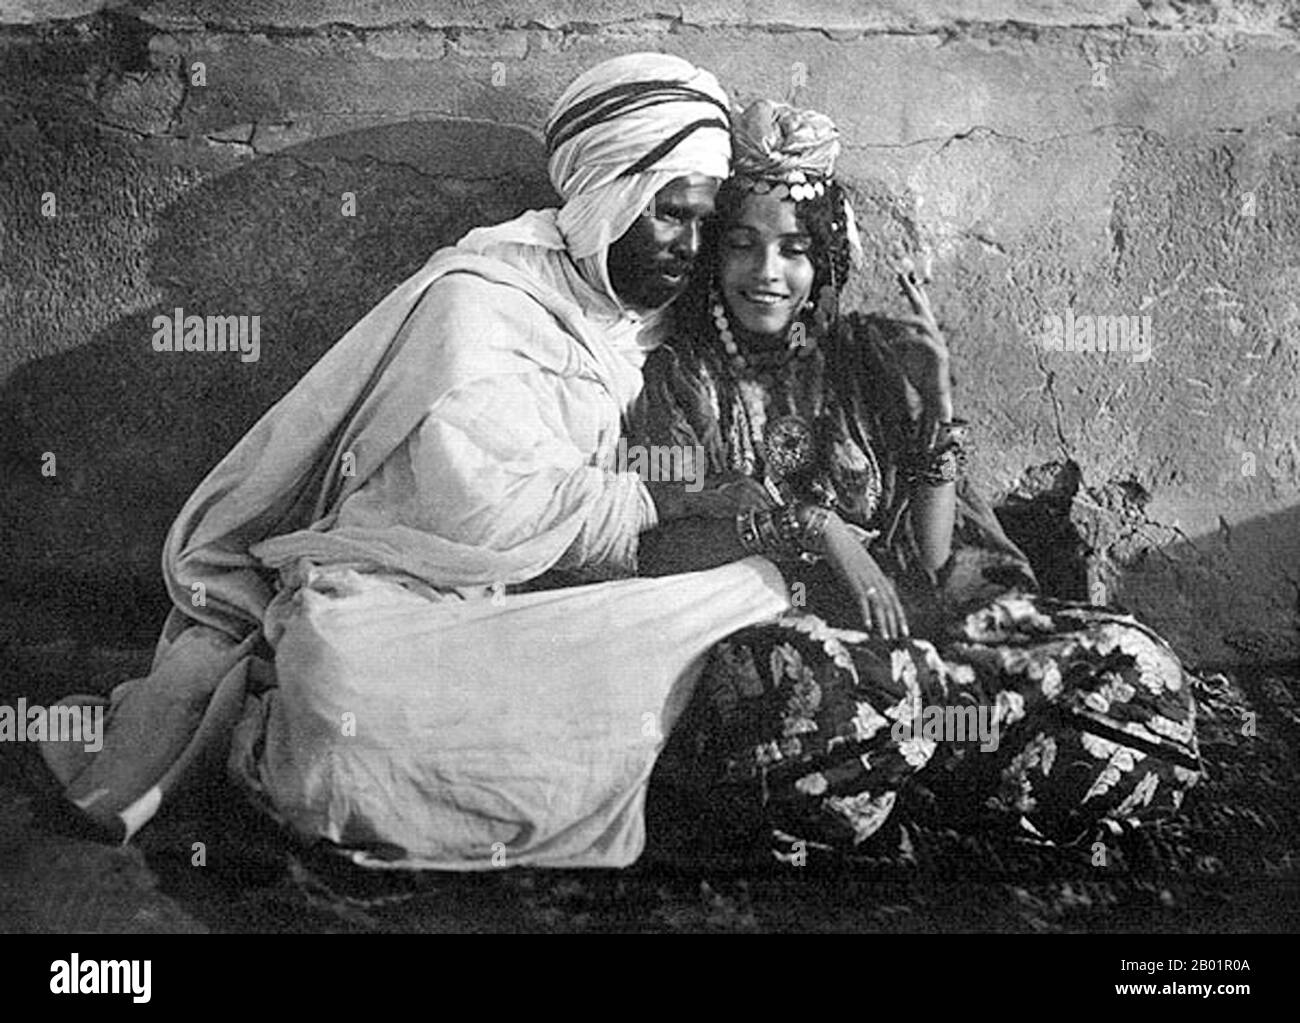 Tunisia/Algeria: A young Ouled Nail couple. Photo by Rudolf Lehnert (13 July 1878 - 16 January 1948), 1904.  Lehnert & Landrock: Rudolf Franz Lehnert (Czech) and Ernst Heinrich Landrock (German) had a photographic company based in Tunis, Cairo and Leipzig before World War II. They specialised in somewhat risque Orientalist images of young Arab and Bedouin women, often dancers. Stock Photo